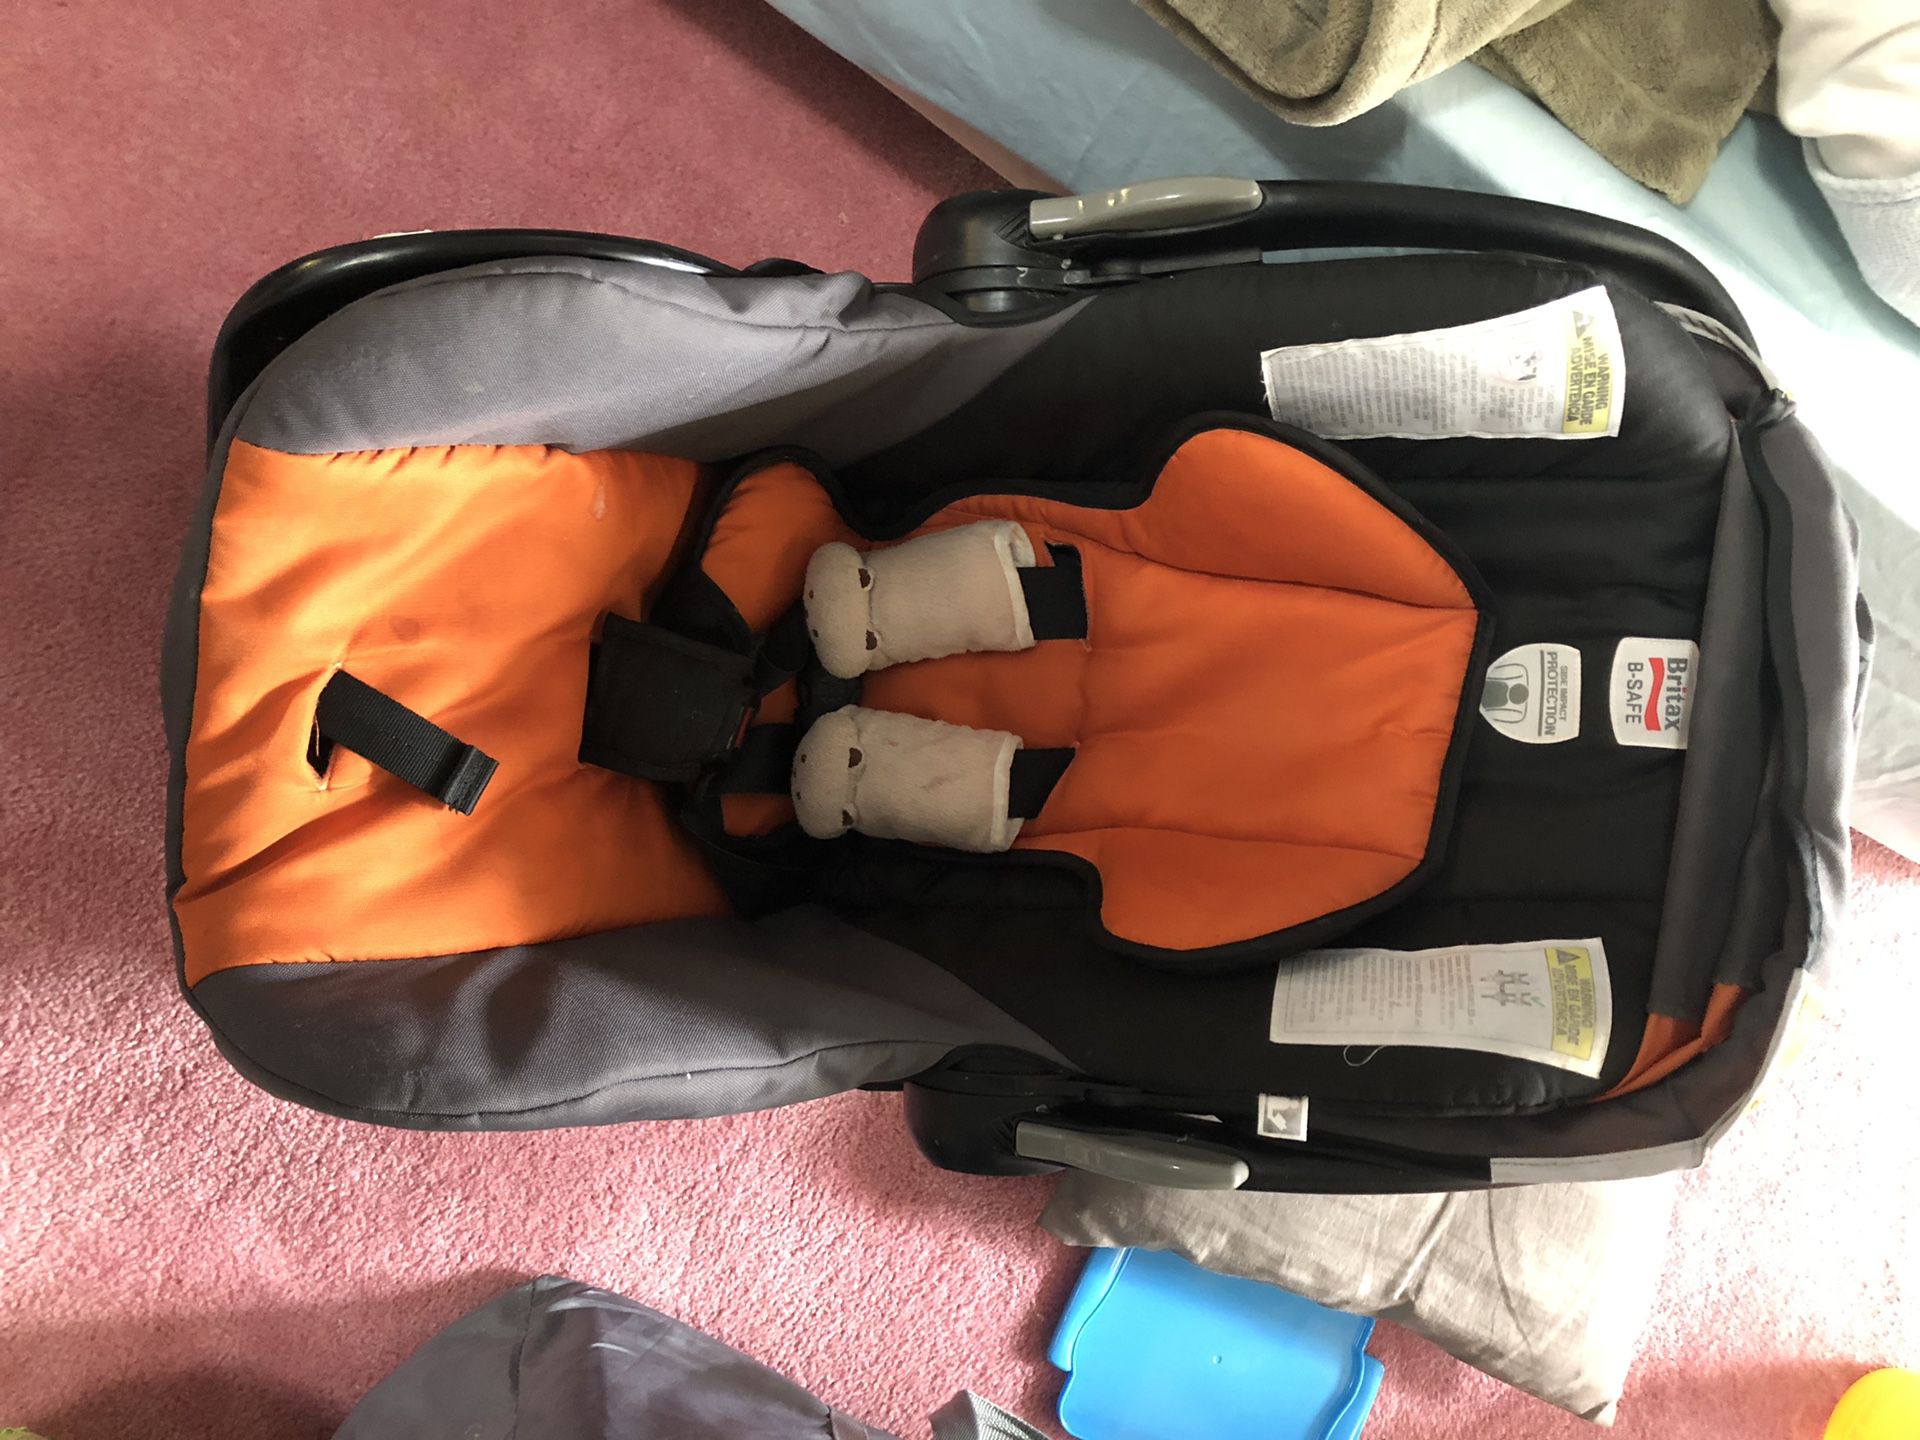 Britax infant Car seat with two bases to use for second car.